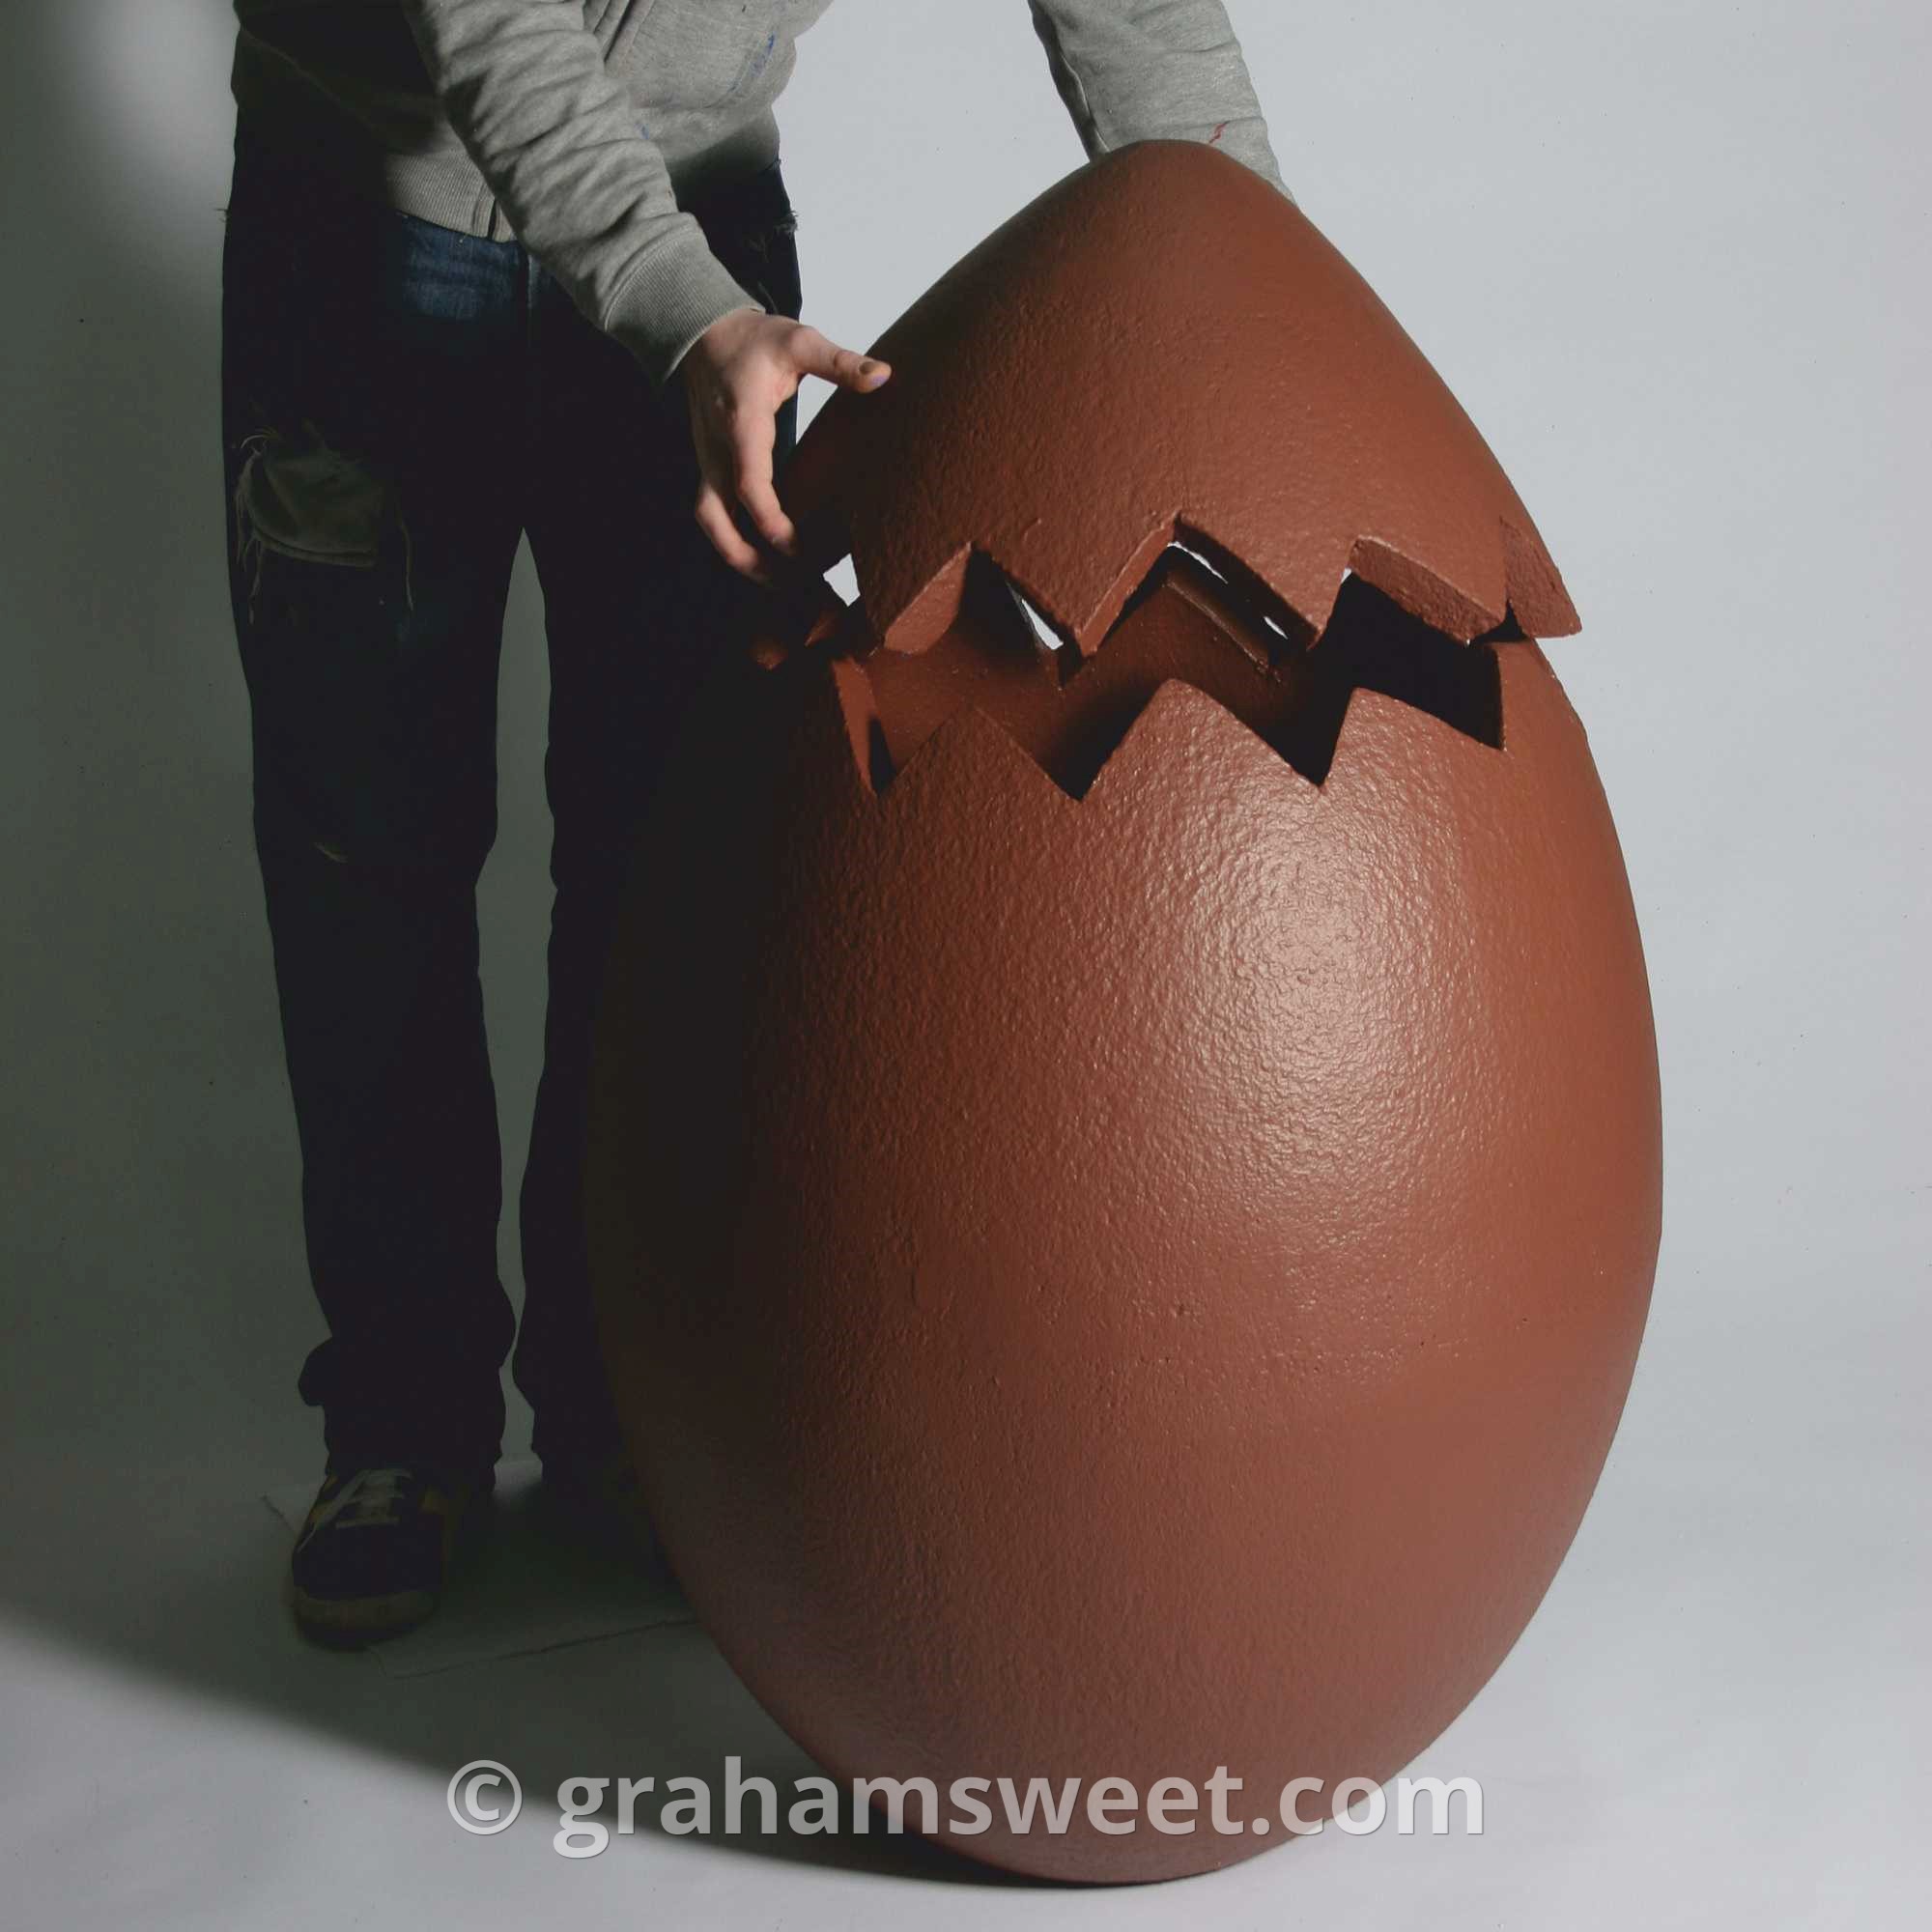 Easter Display props for shops, events and activities. Giant